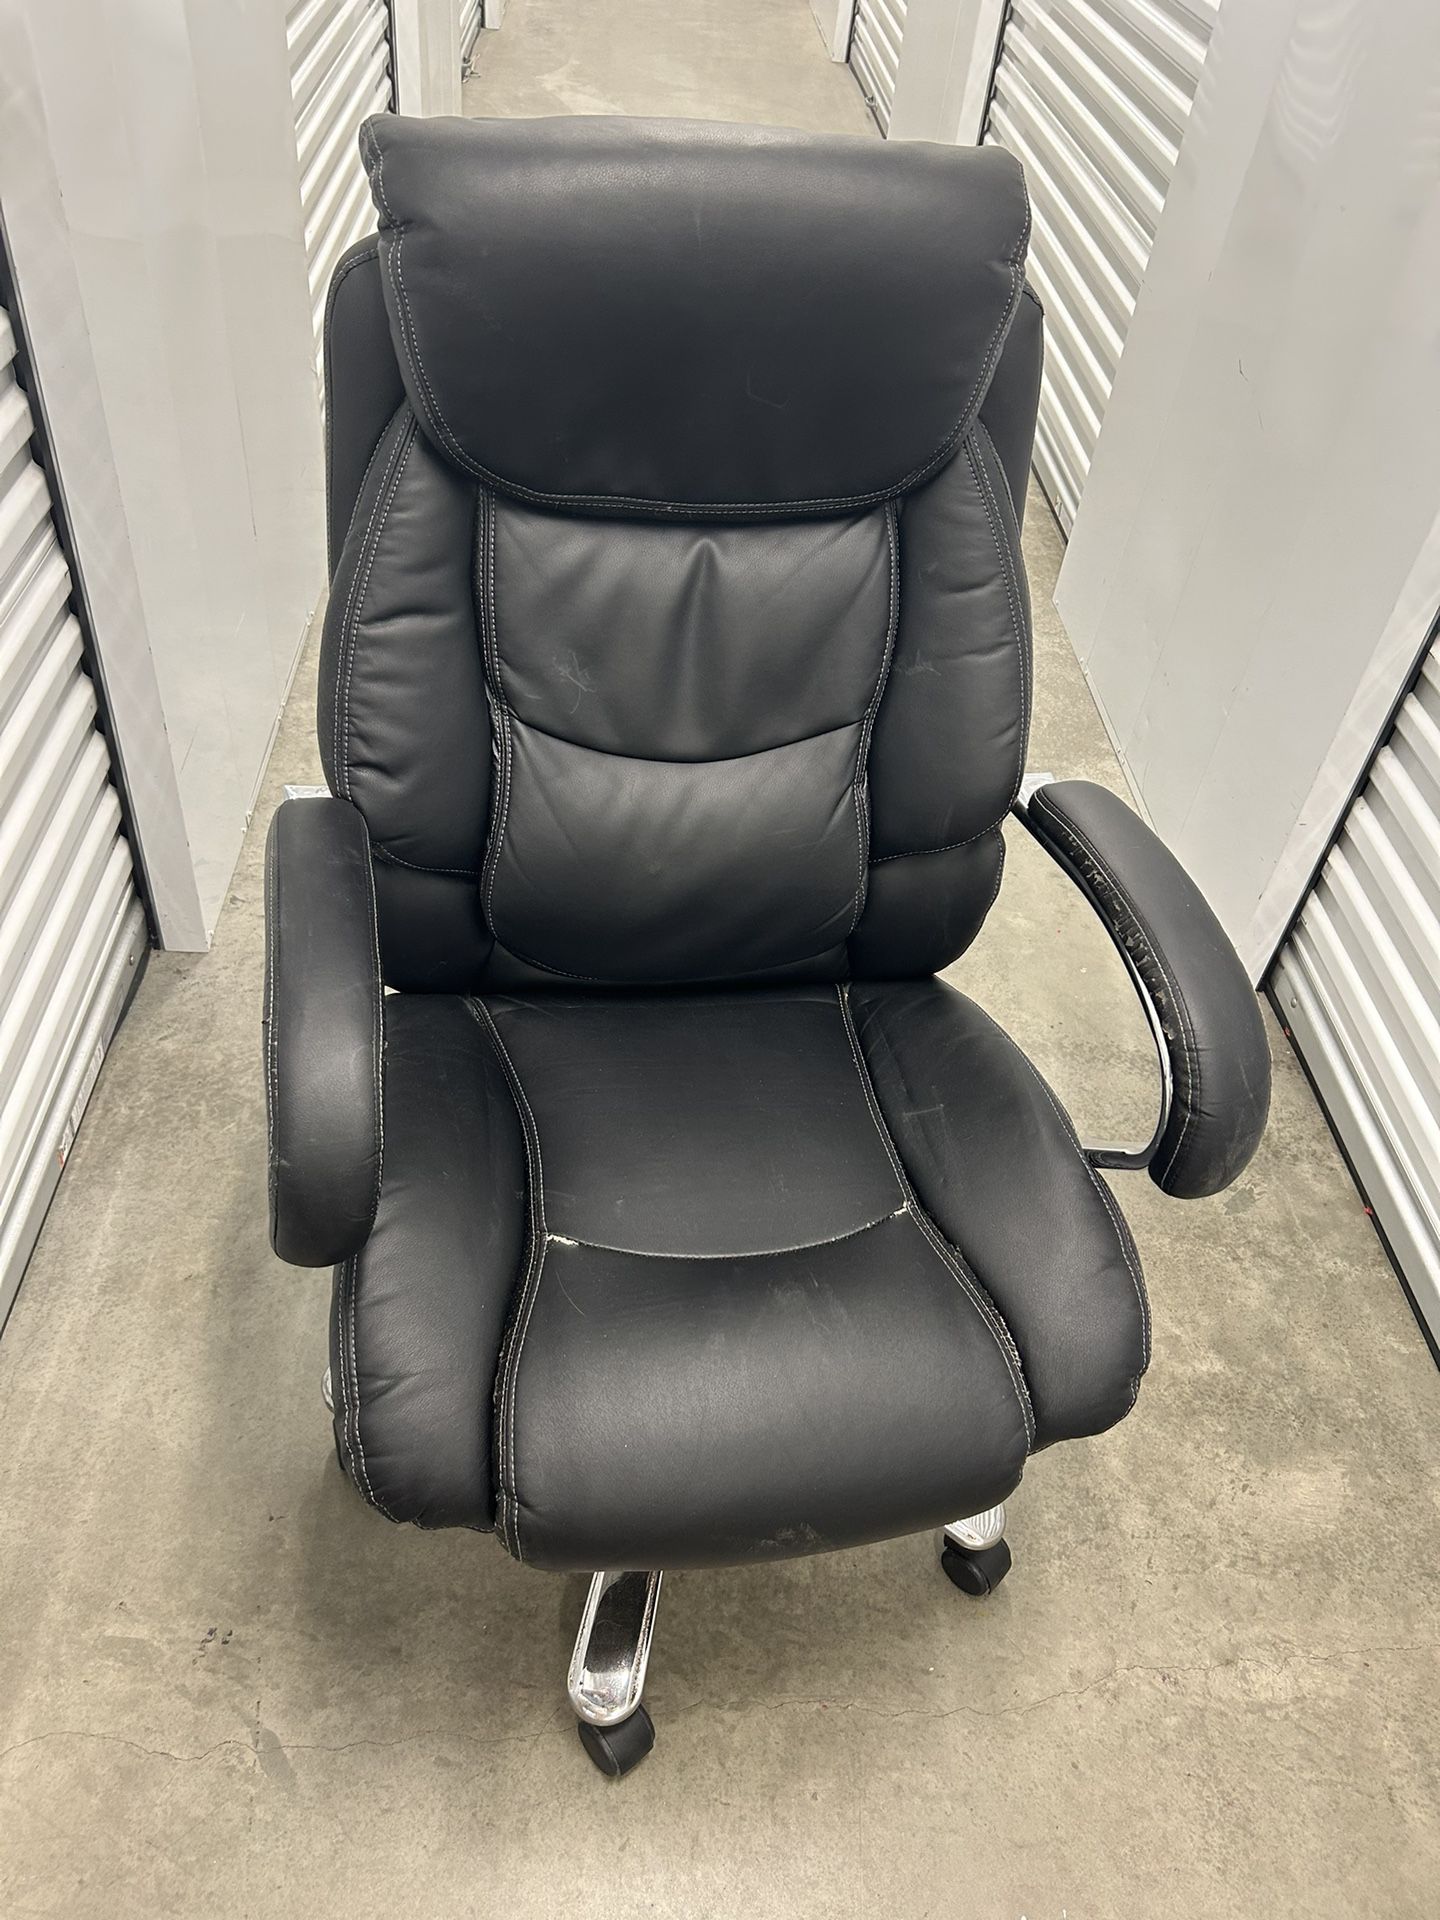 Large Executive Office Chair